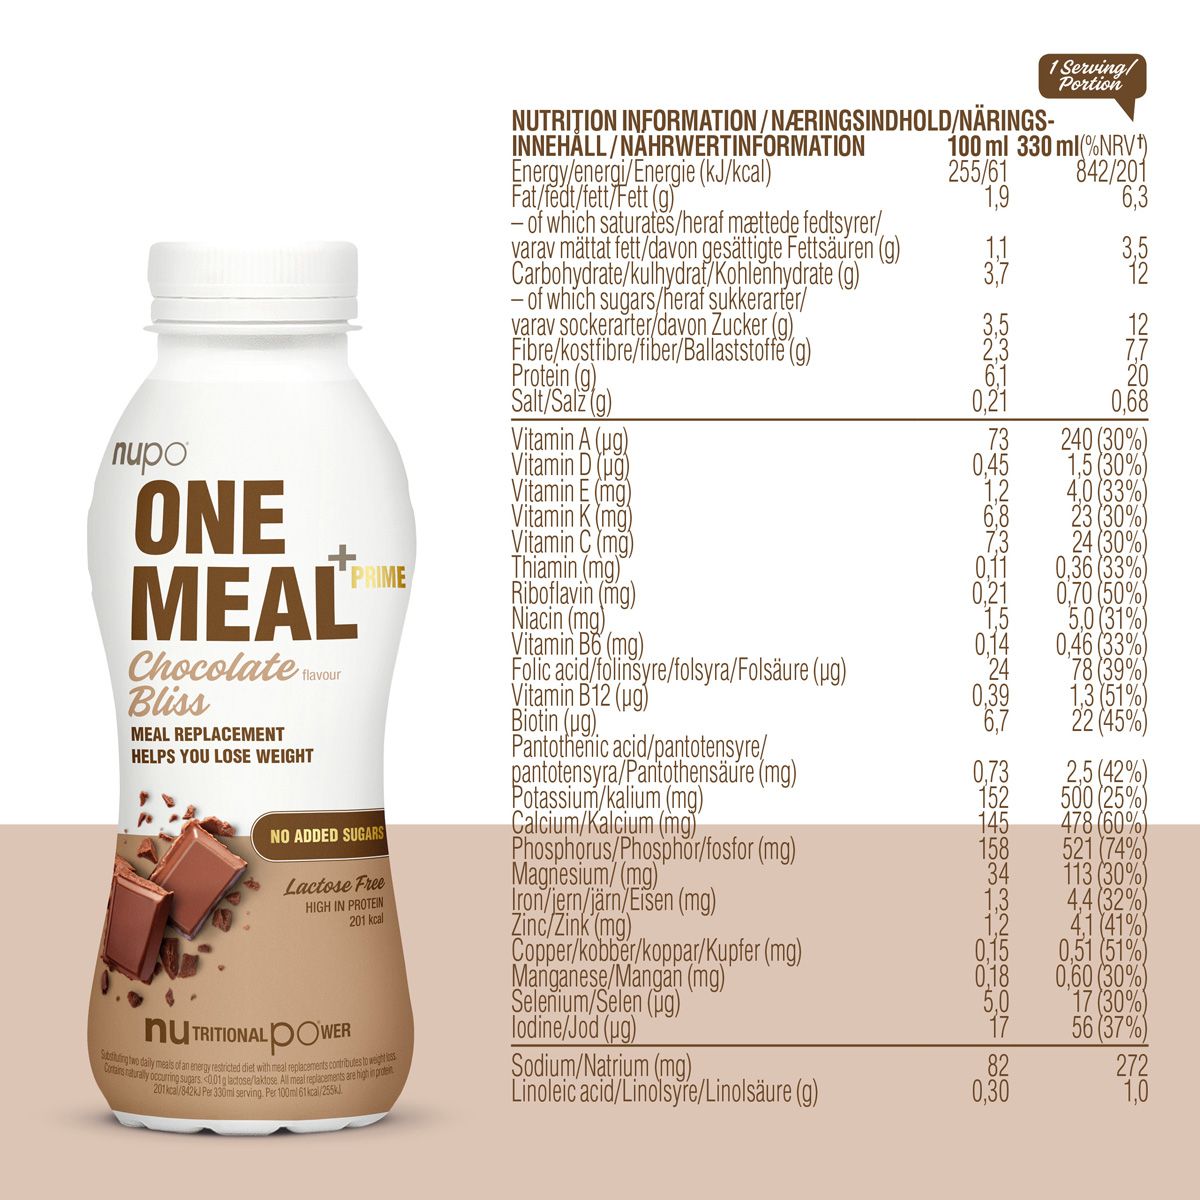 One Meal +Prime Shake Chocolate Bliss